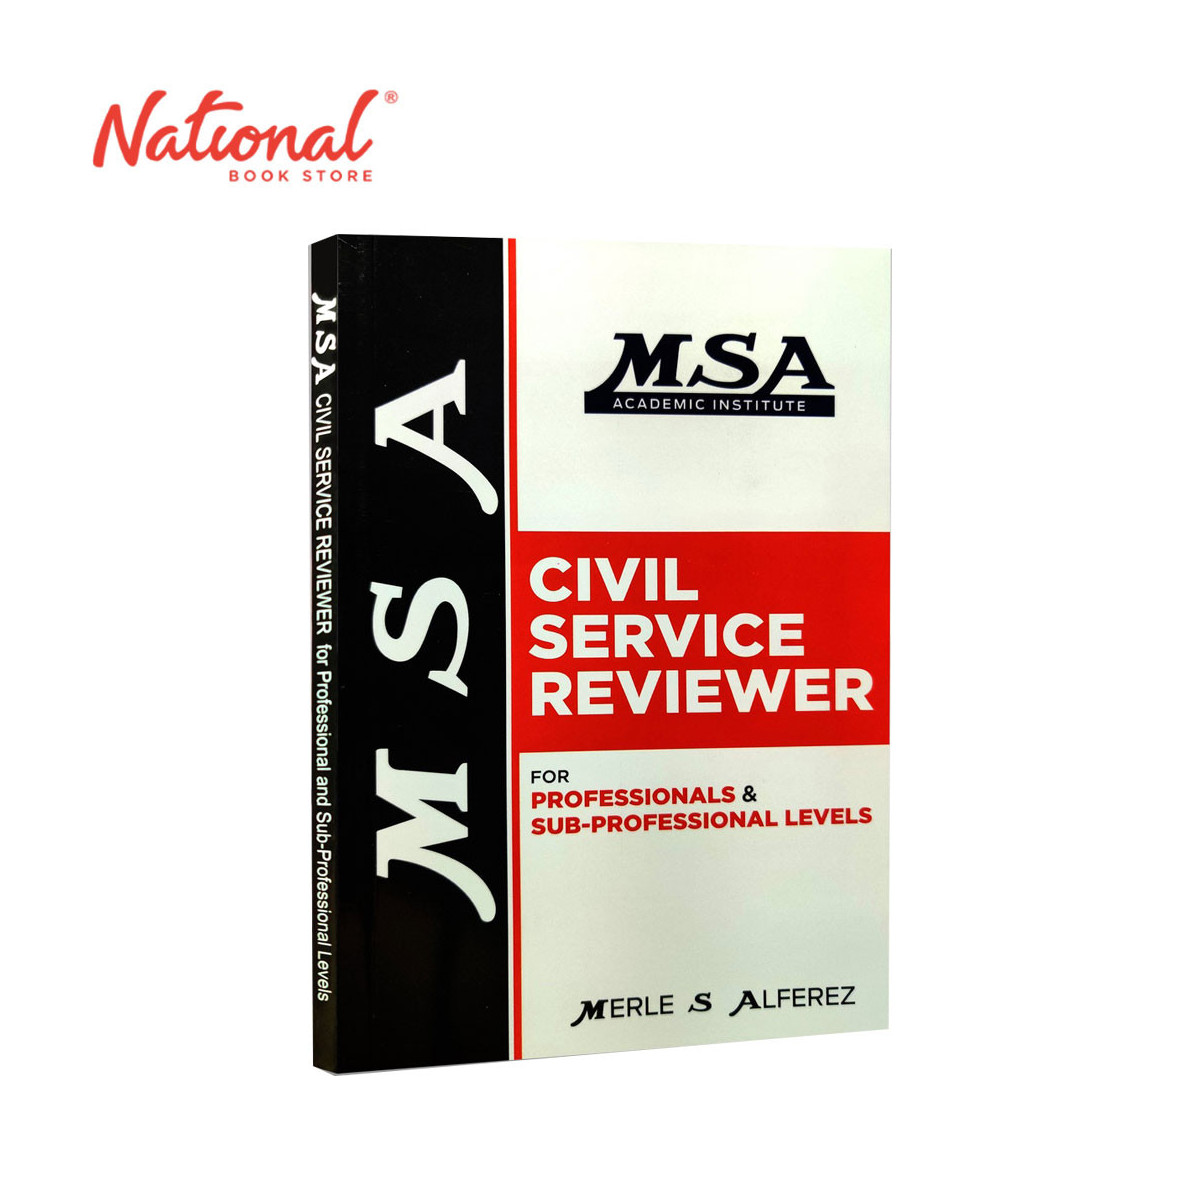 MSA Civil Service Reviewer for Professional & Sub-Professional Level by Merle S. Alferez - Reference